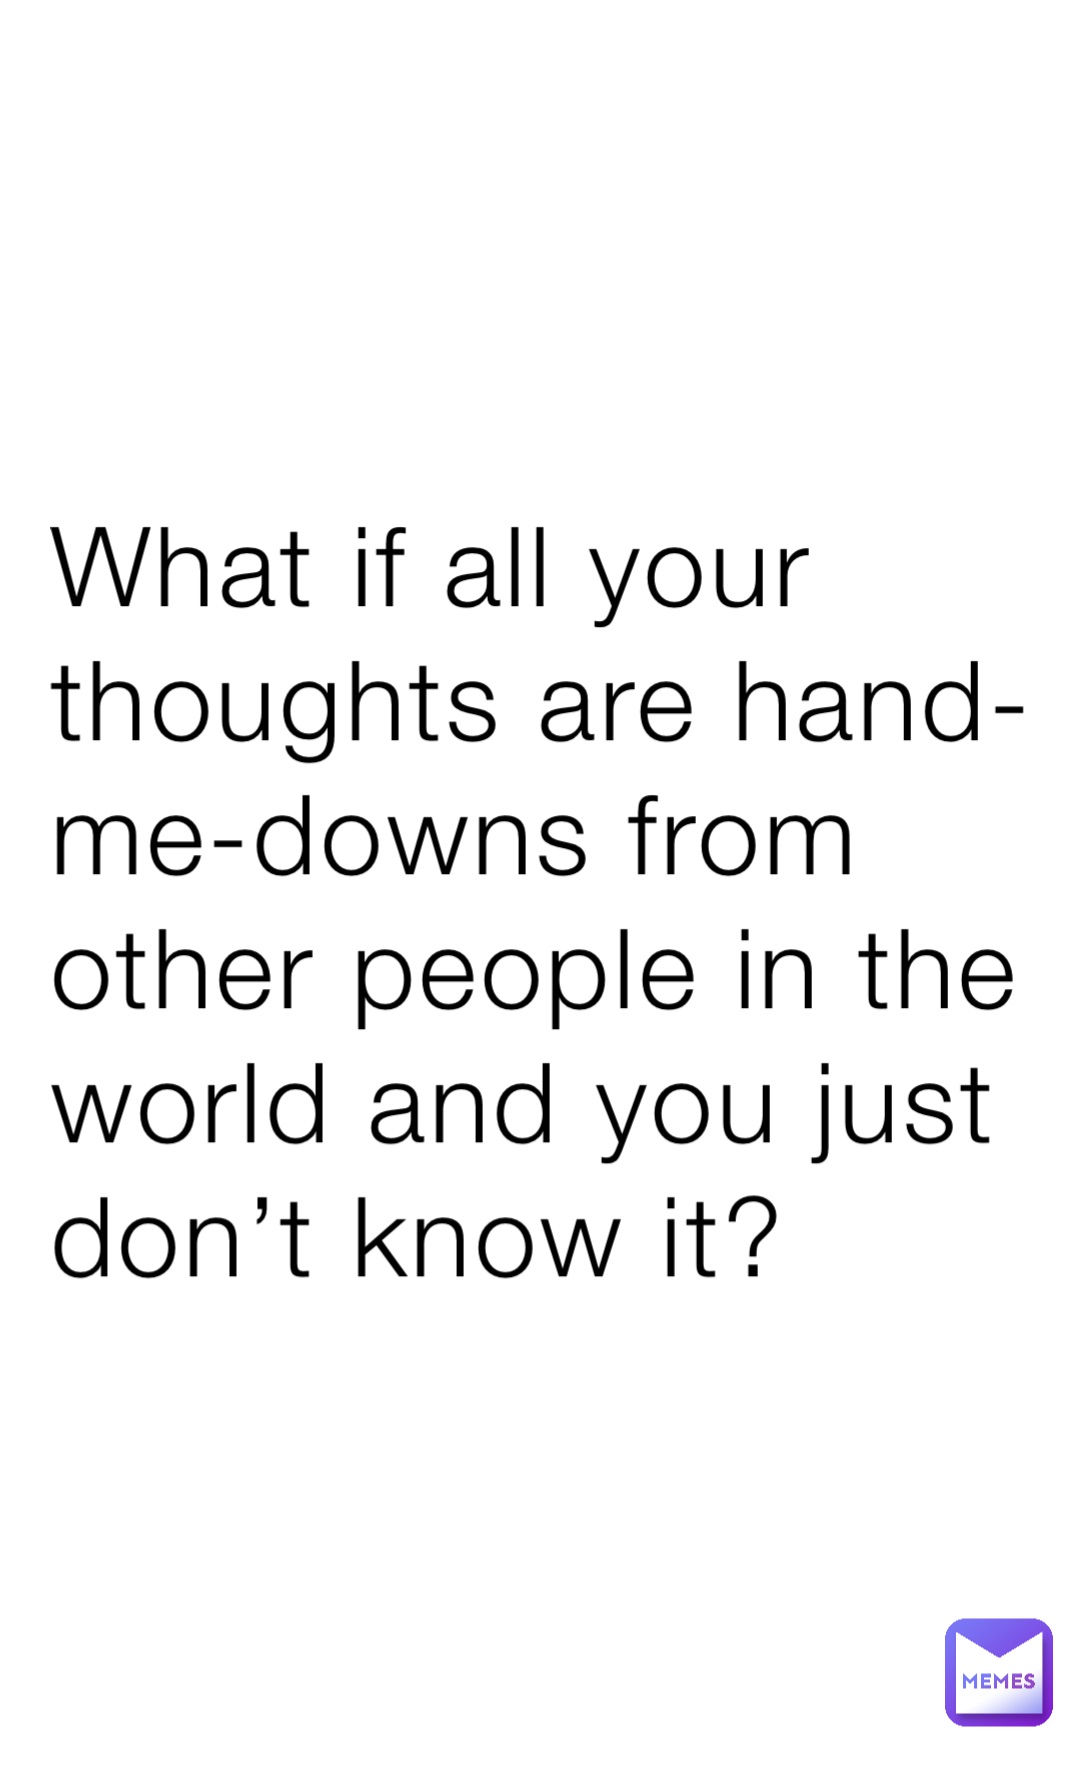 What if all your thoughts are hand-me-downs from other people in the world and you just don’t know it?